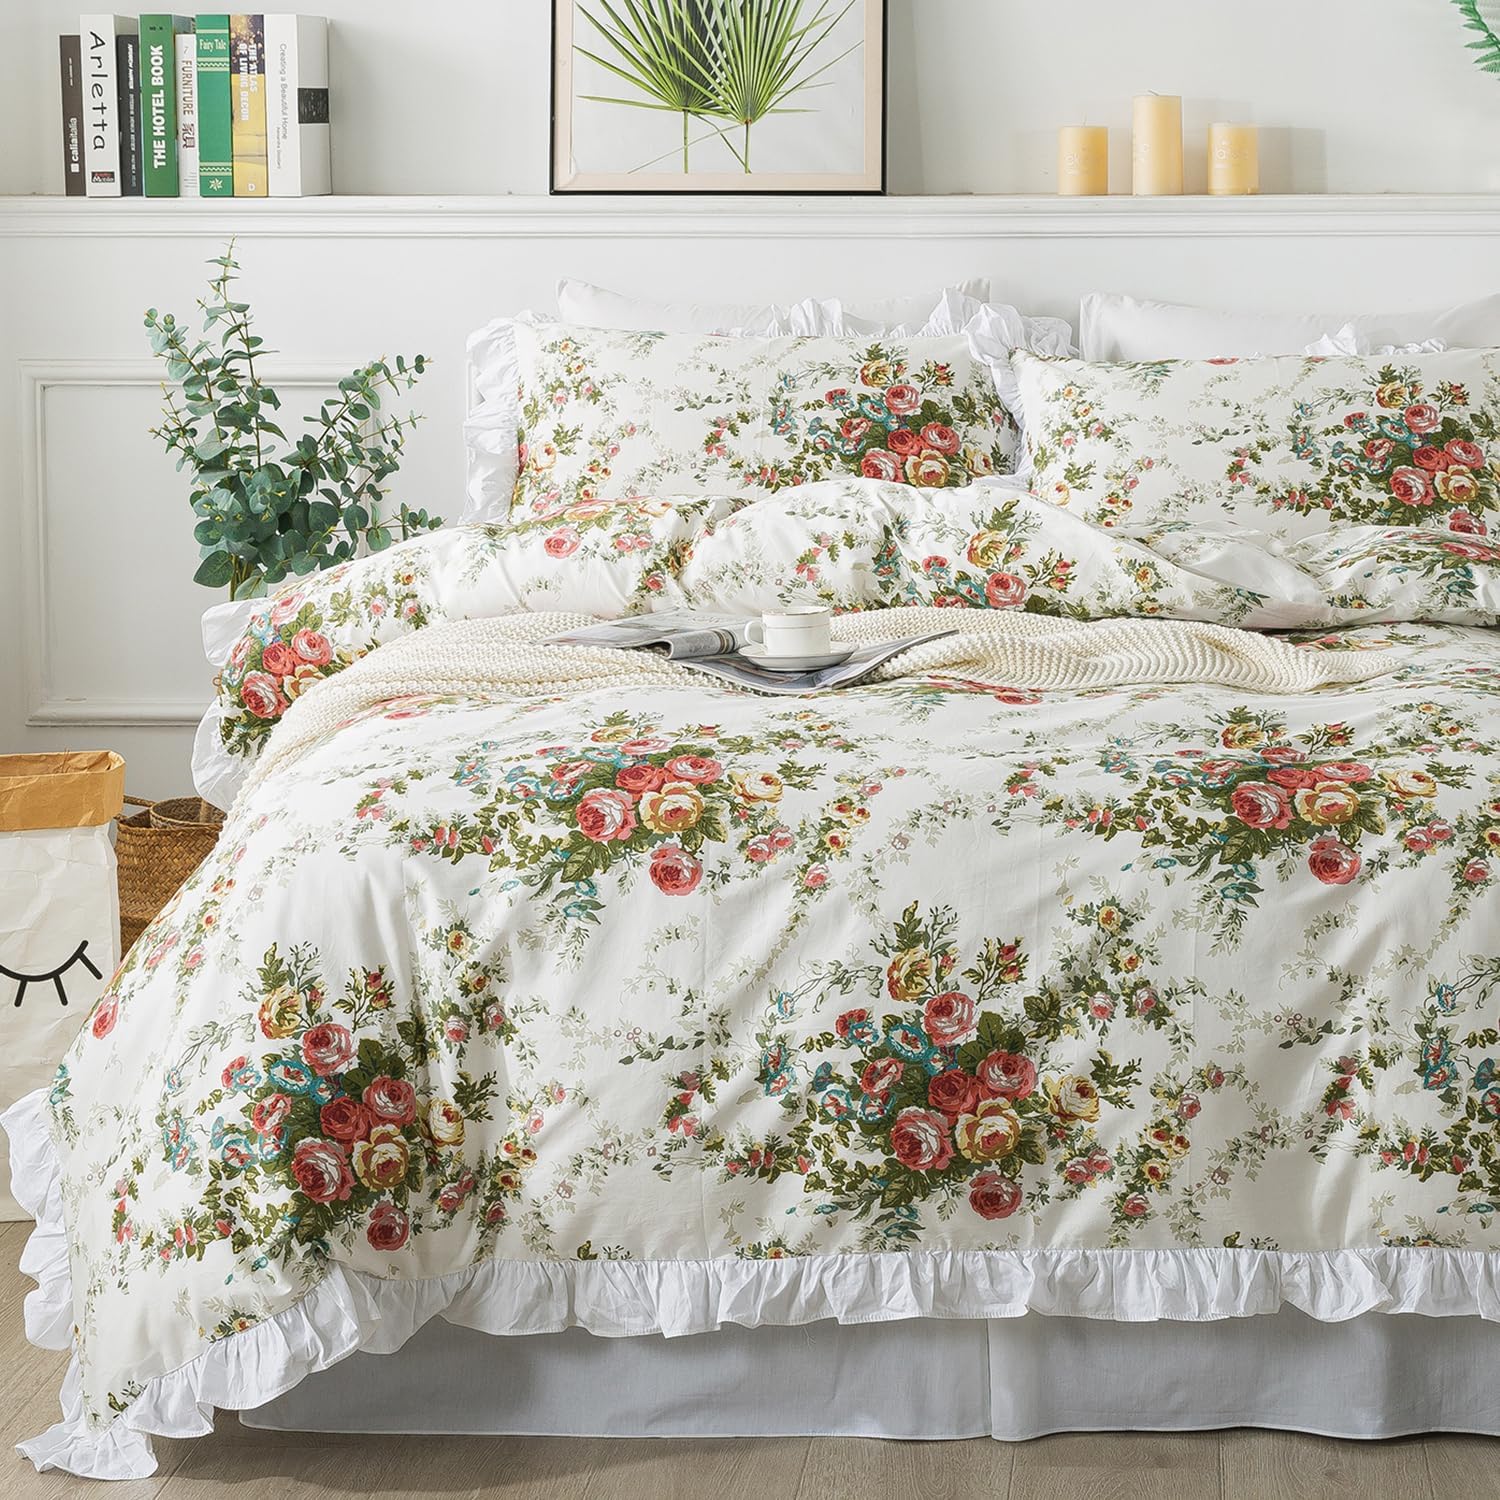 FADFAY Floral Duvet Cover Set Queen Size 100% Cotton Ruffle Vintage Rose Comforter Cover Set, Red Teal Flower Printed Off White Girls Shabby Bed Covers,Soft and Breathable Queen Size, 3 Pcs